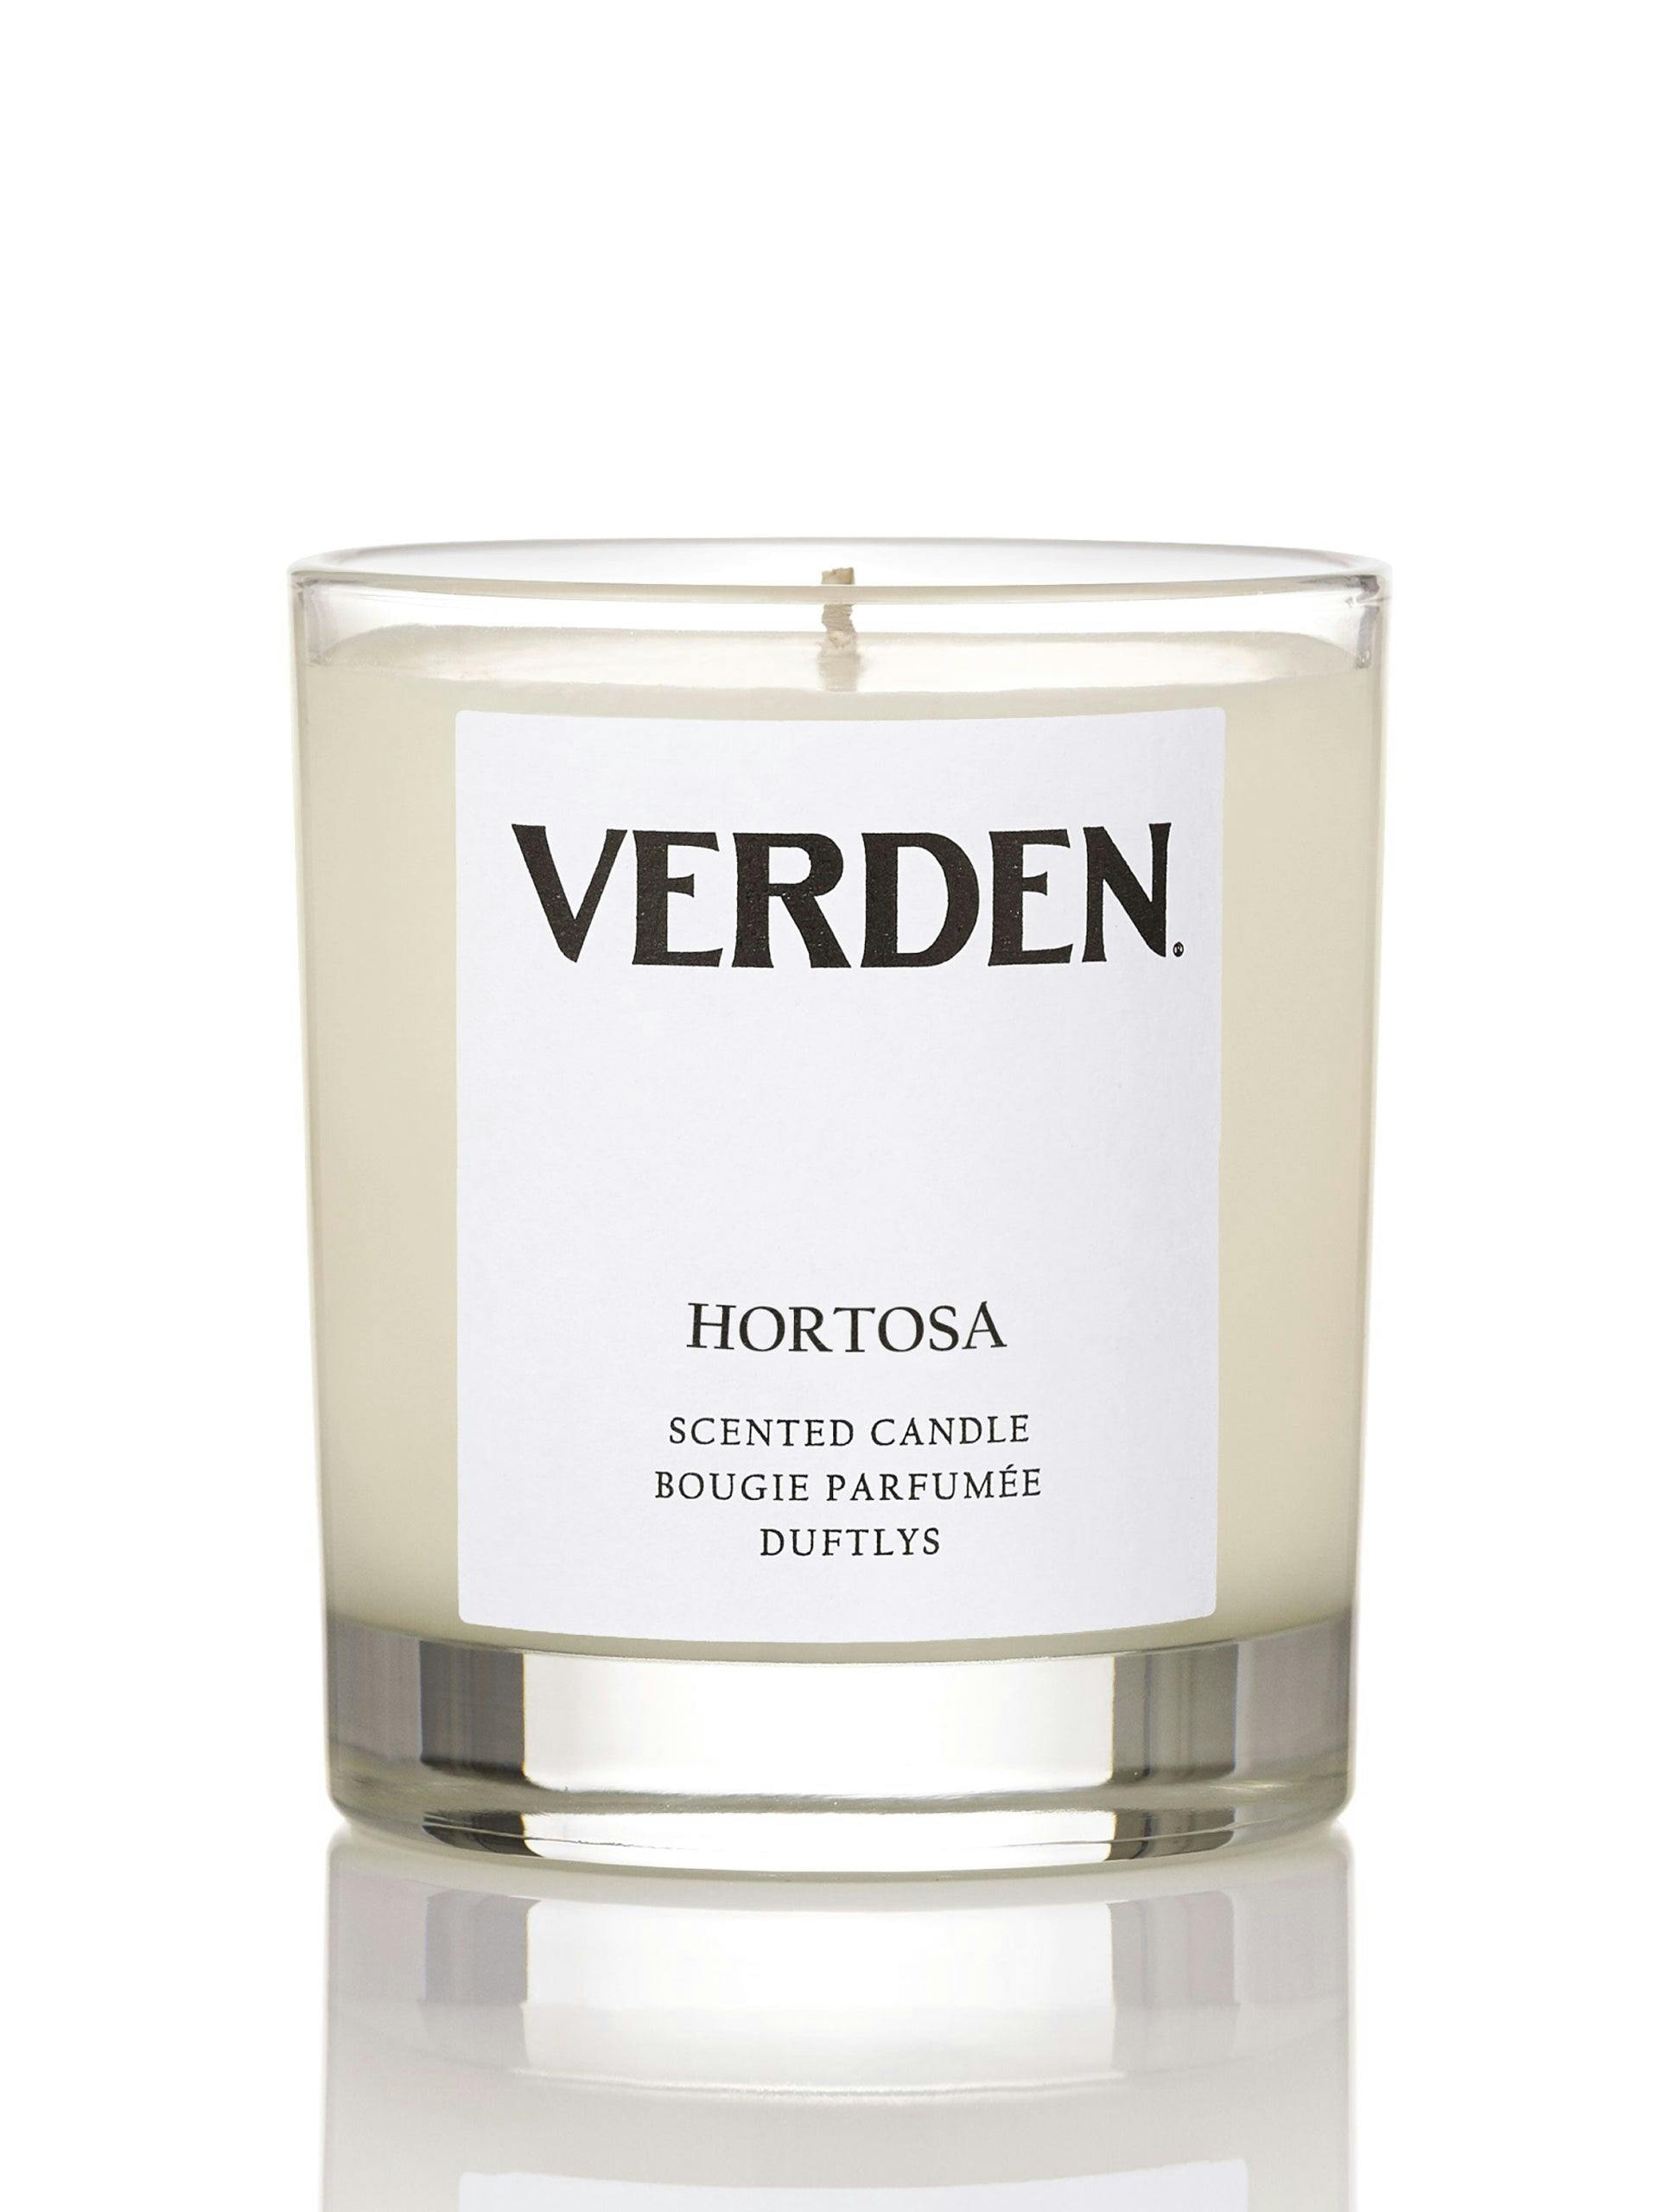 Hortosa scented candle